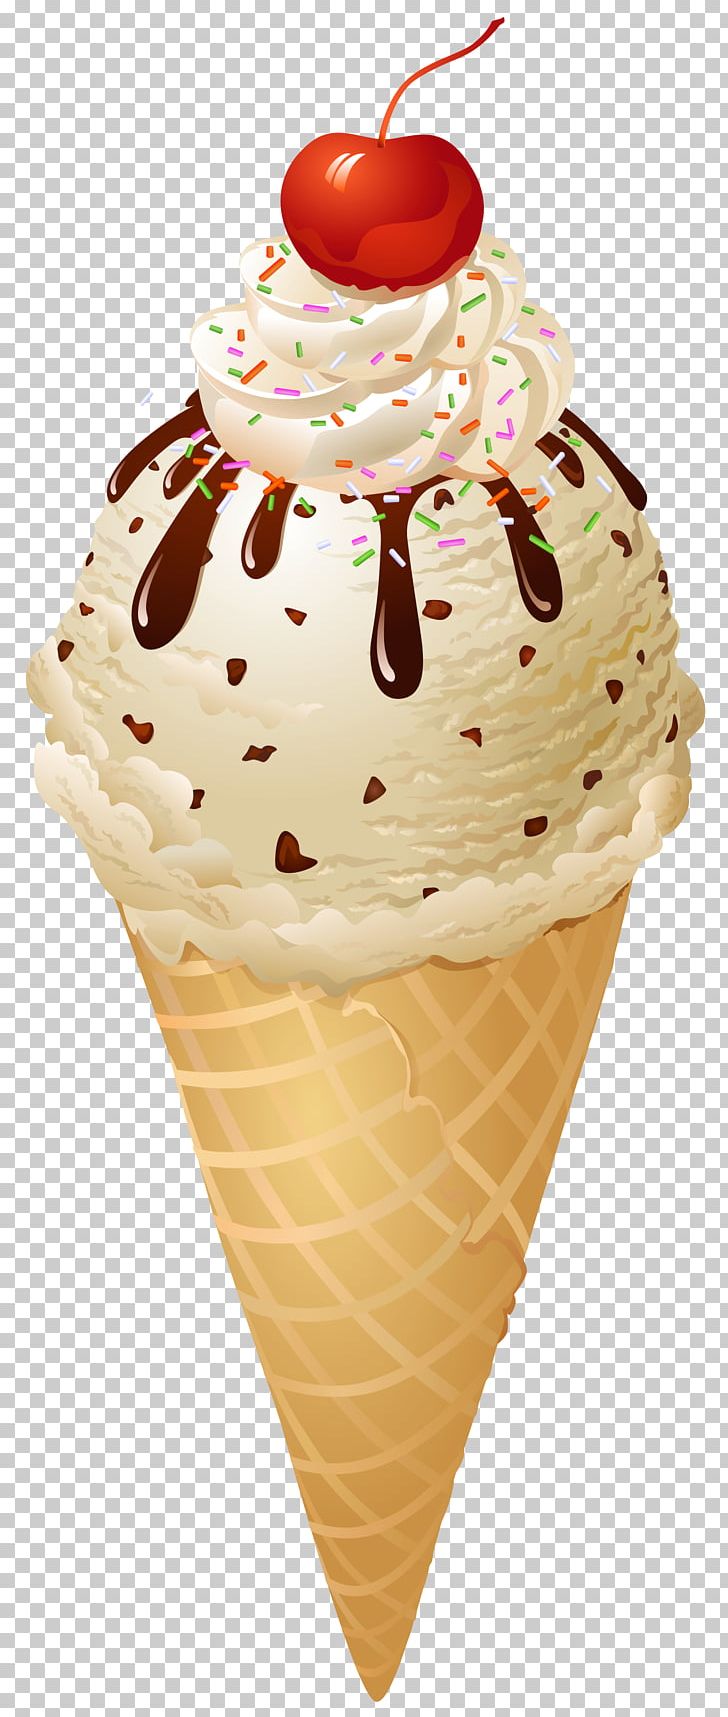 Ice Cream Cones Chocolate Ice Cream Sundae PNG, Clipart, Apple Pie, Chocolate, Chocolate Ice Cream, Cream, Dairy Product Free PNG Download